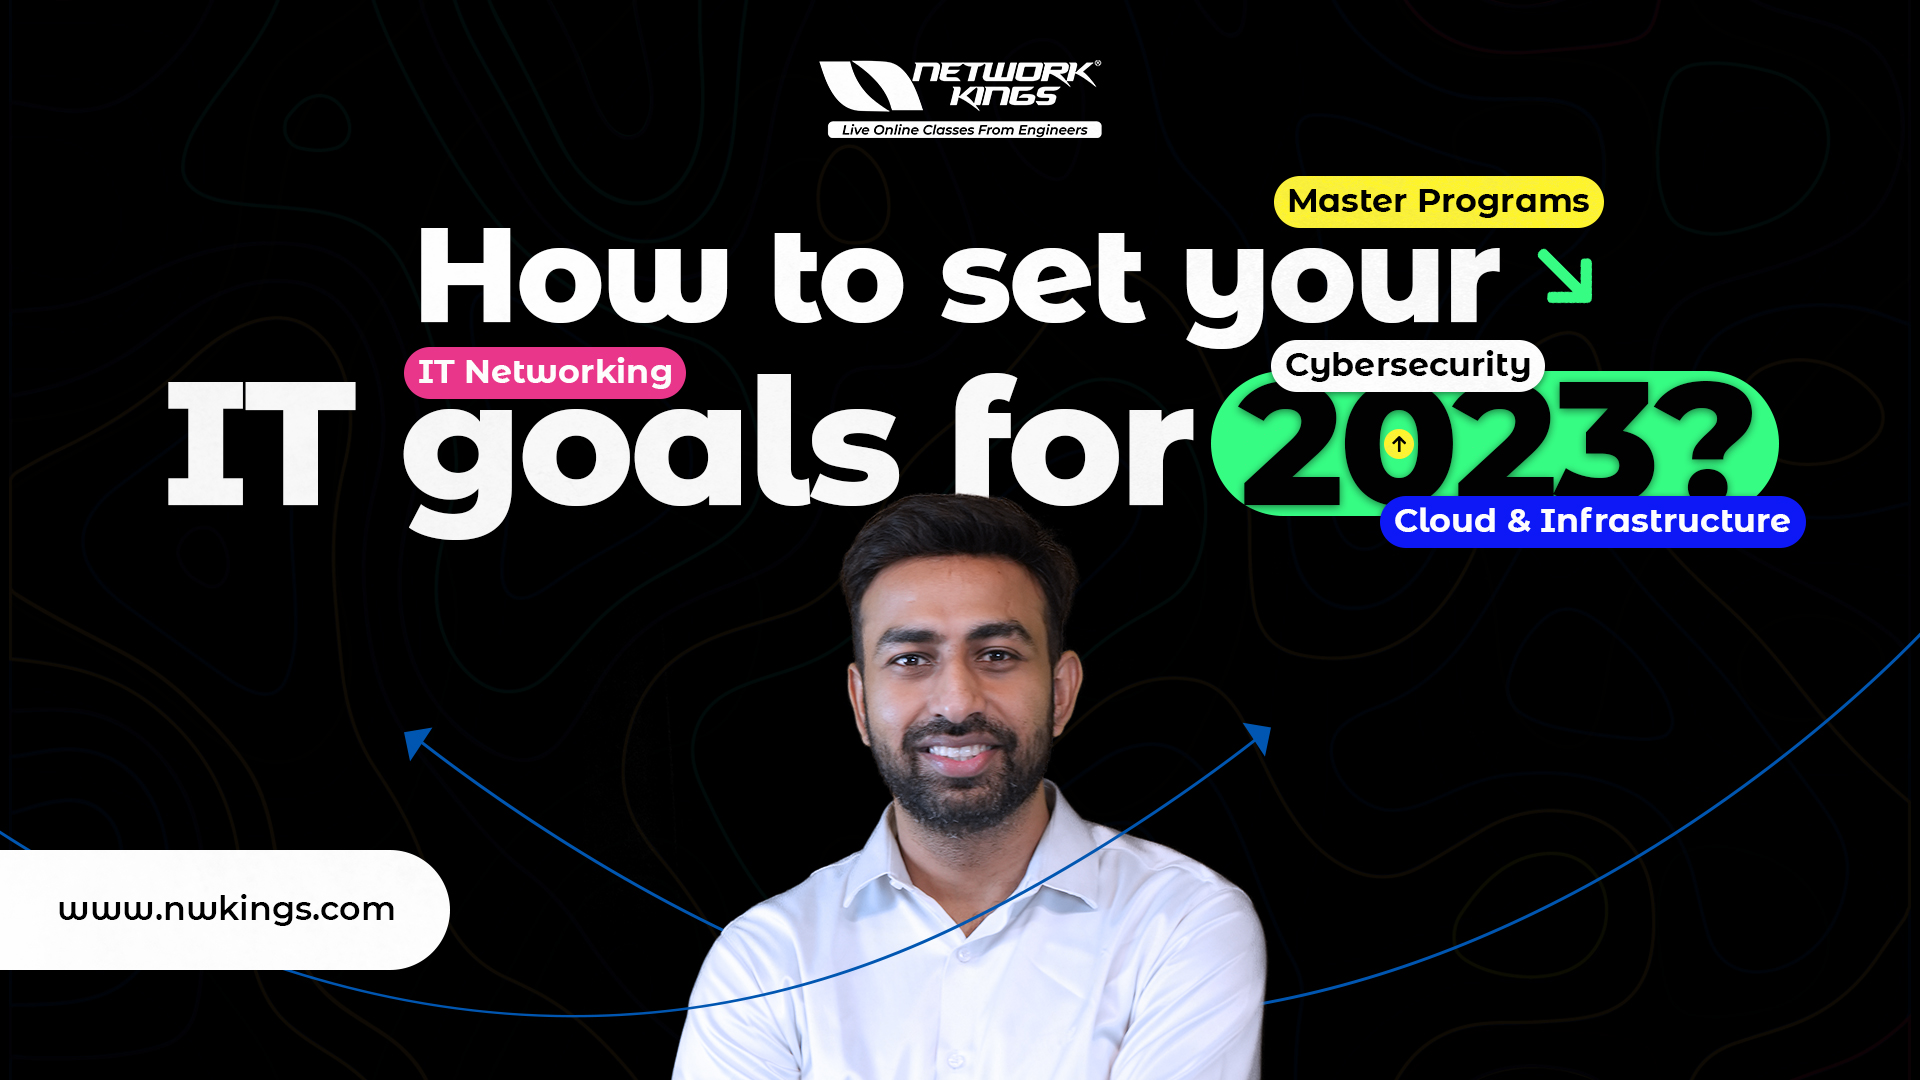 The IT Career Goals: How To Set Your IT Goals For 2023?